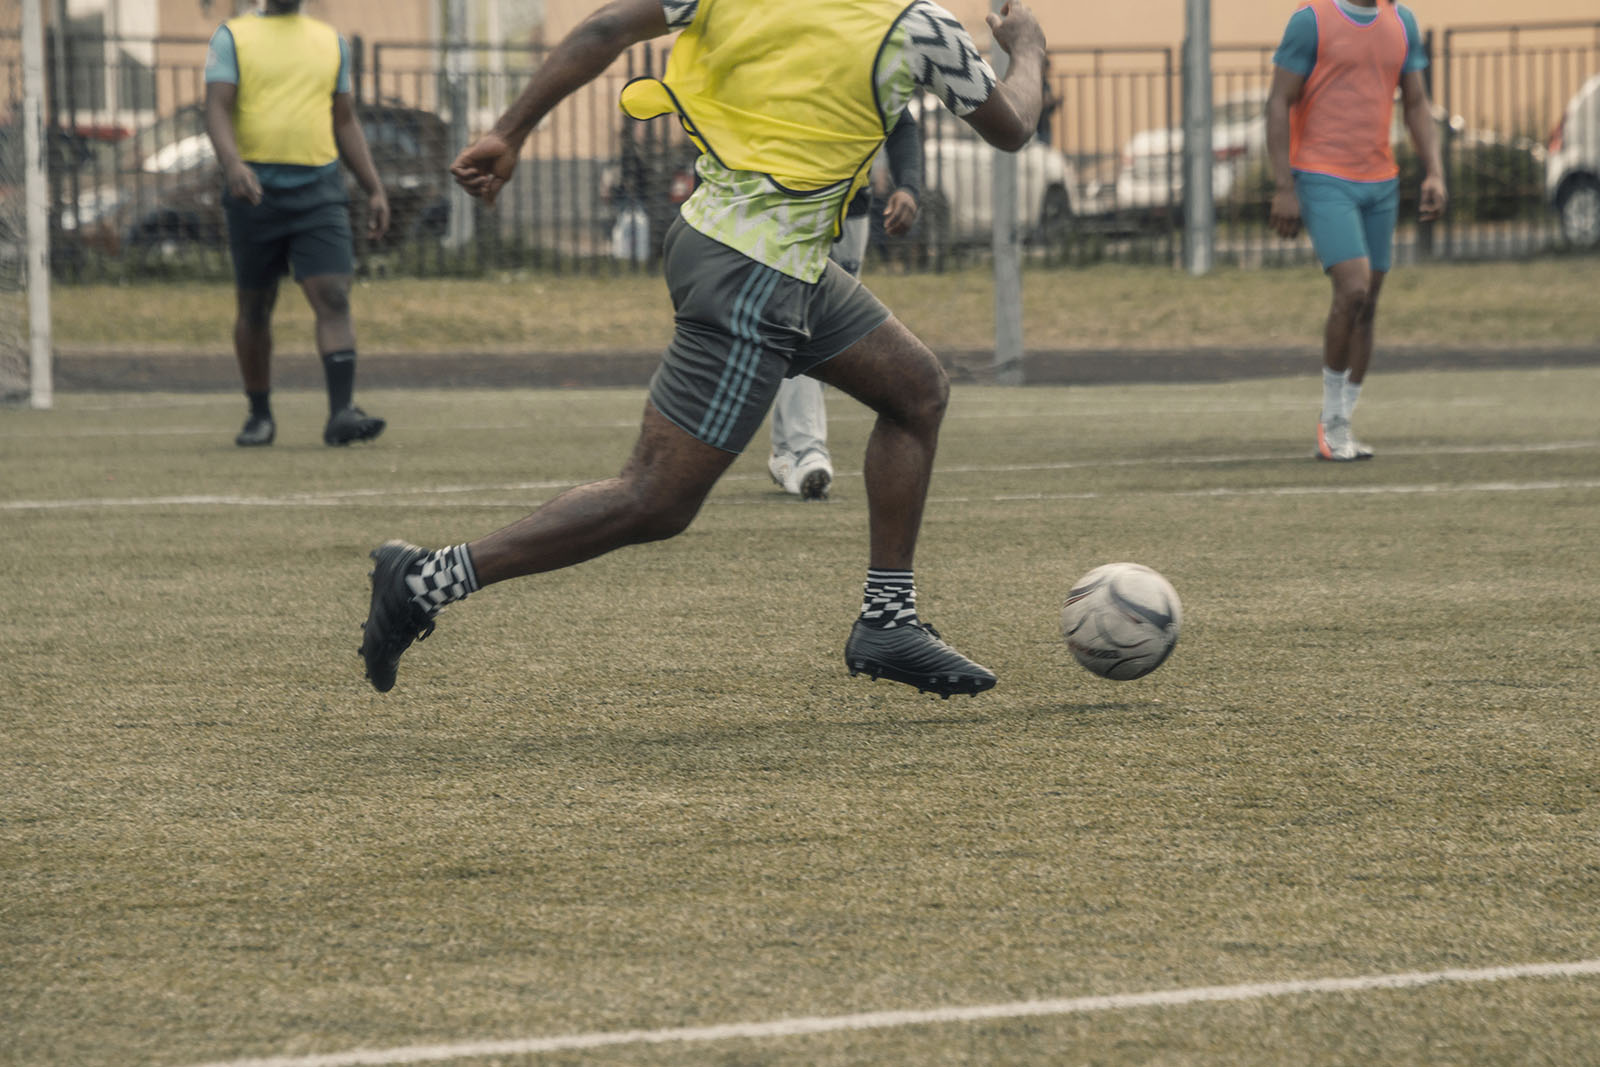 soccer player running down field with soccer ball showing how easy it is to incur a foot or ankle injury in sports